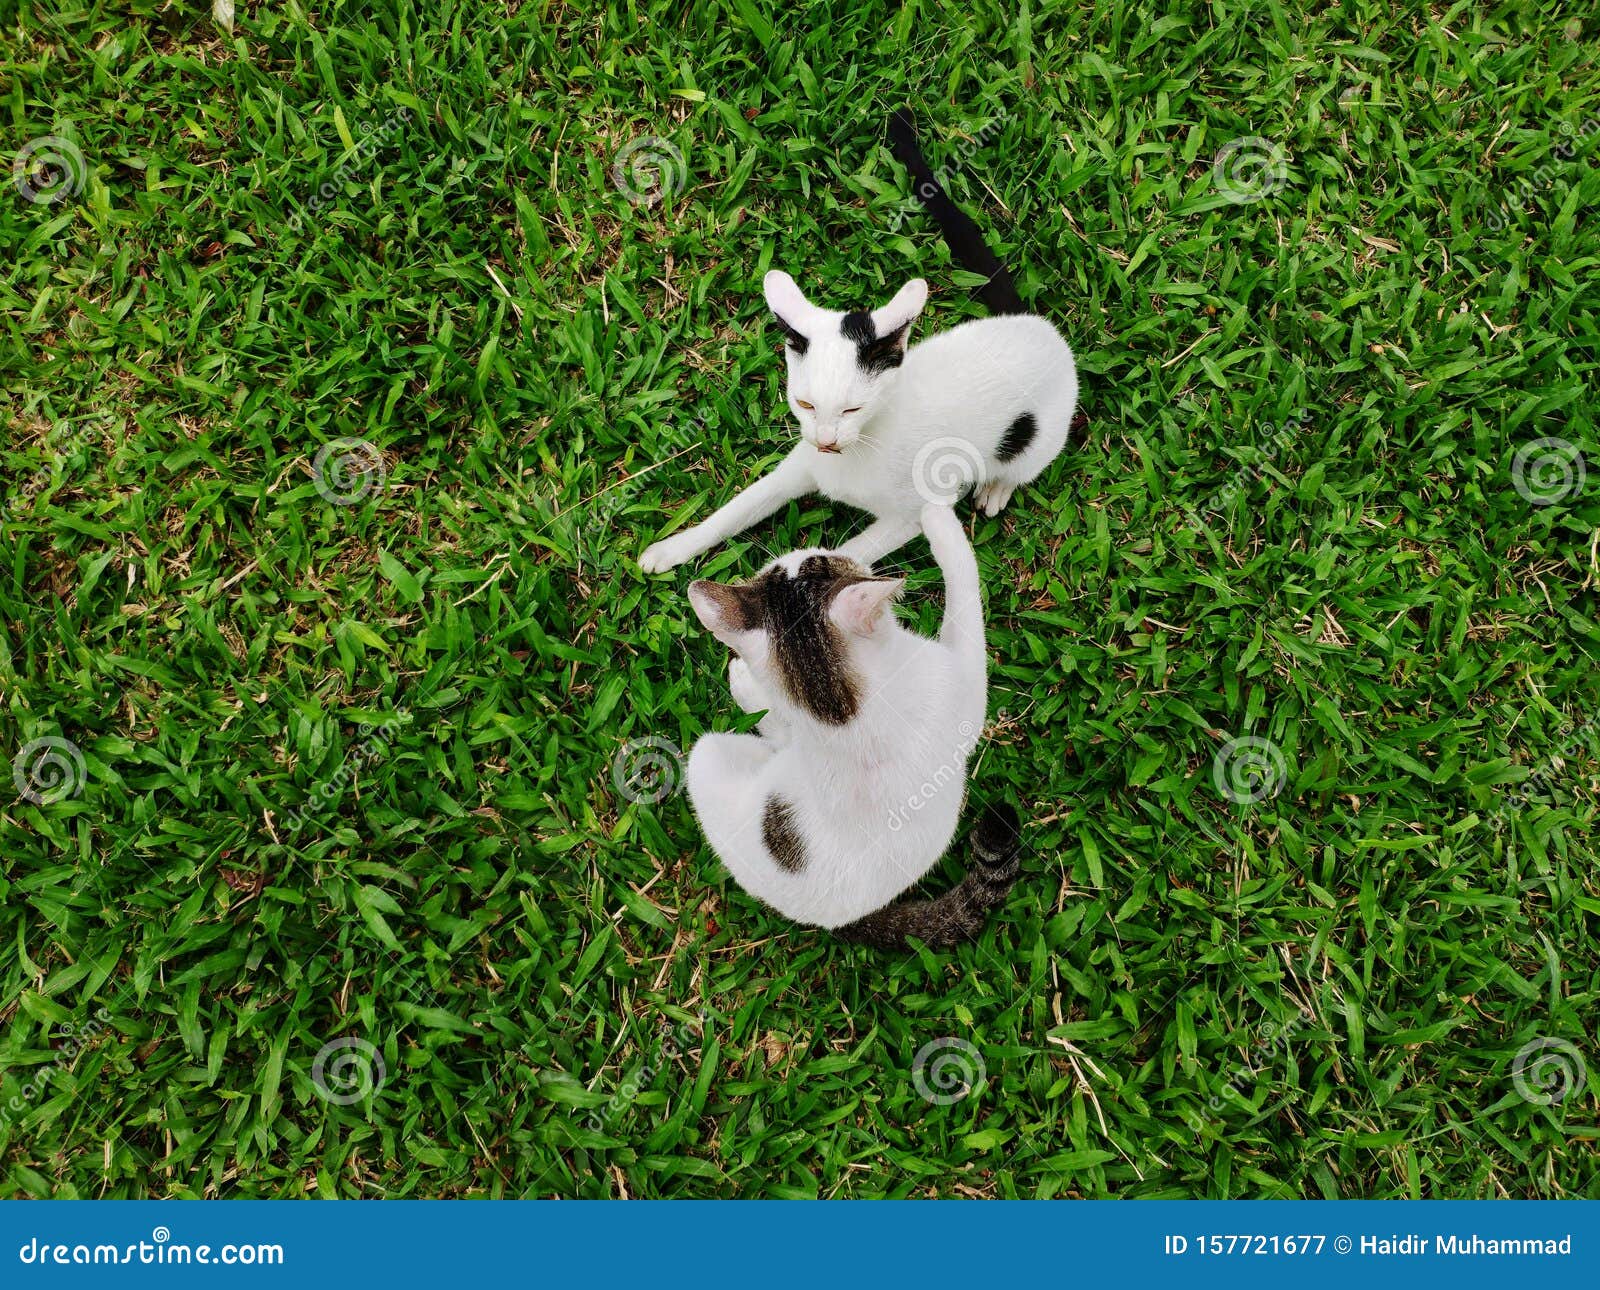 Cute Twin Cats Playing In Green Grass At Garden Stock Image Image Of Fresh Happiness 157721677